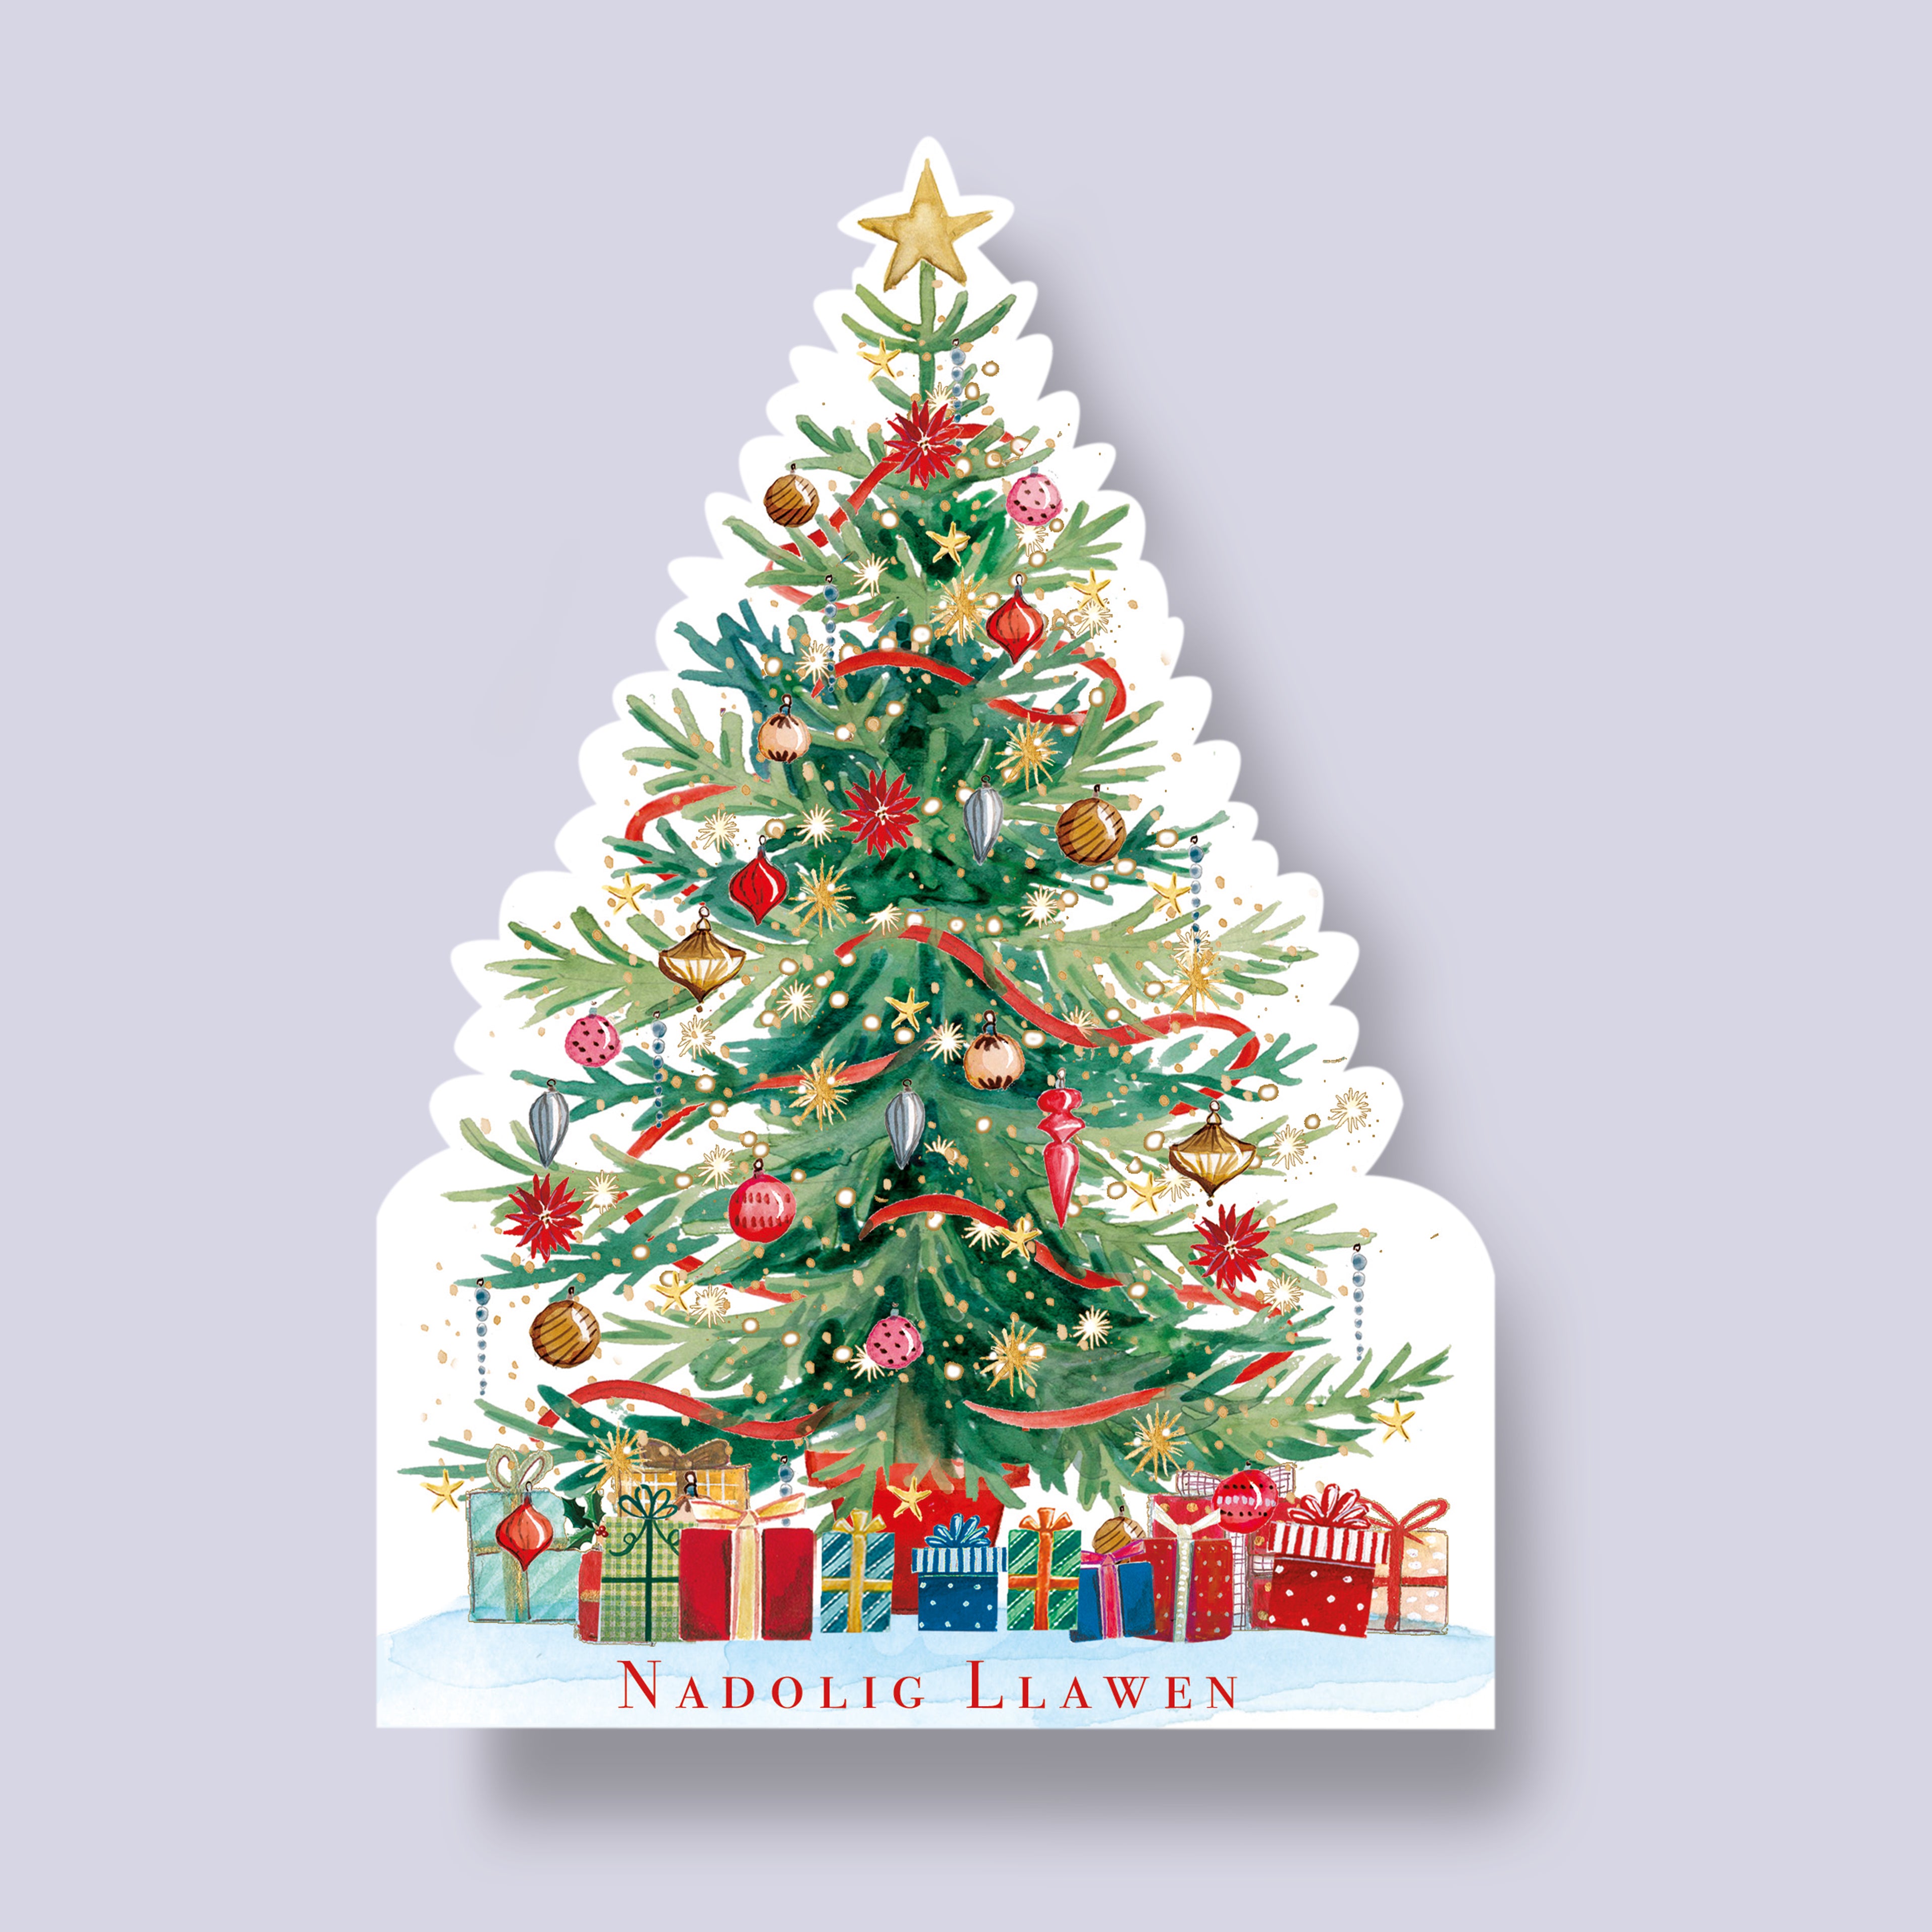 Coeden Nadolig - Welsh pack of 10 charity Christmas cards with envelopes